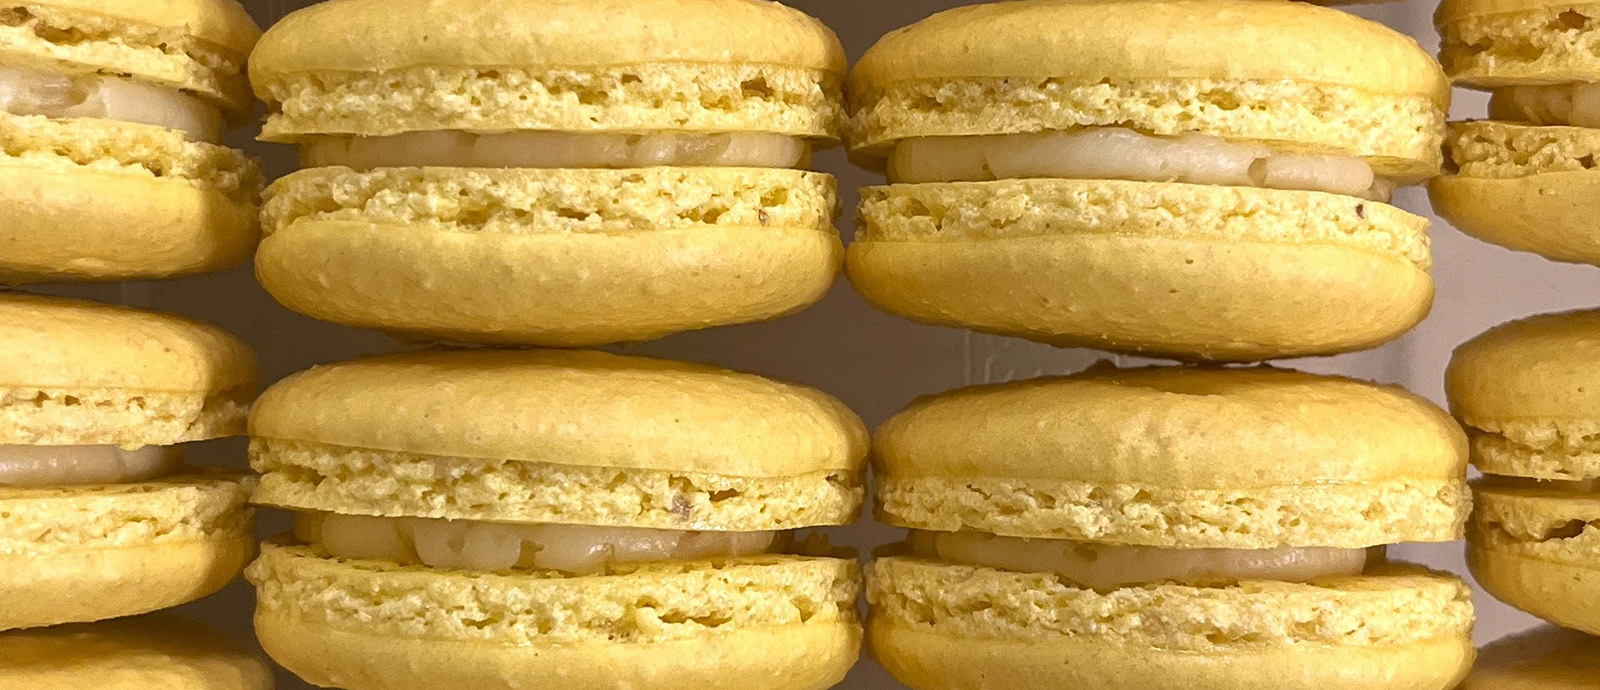 Soft, yellow macaroons from Pipit's Bakery